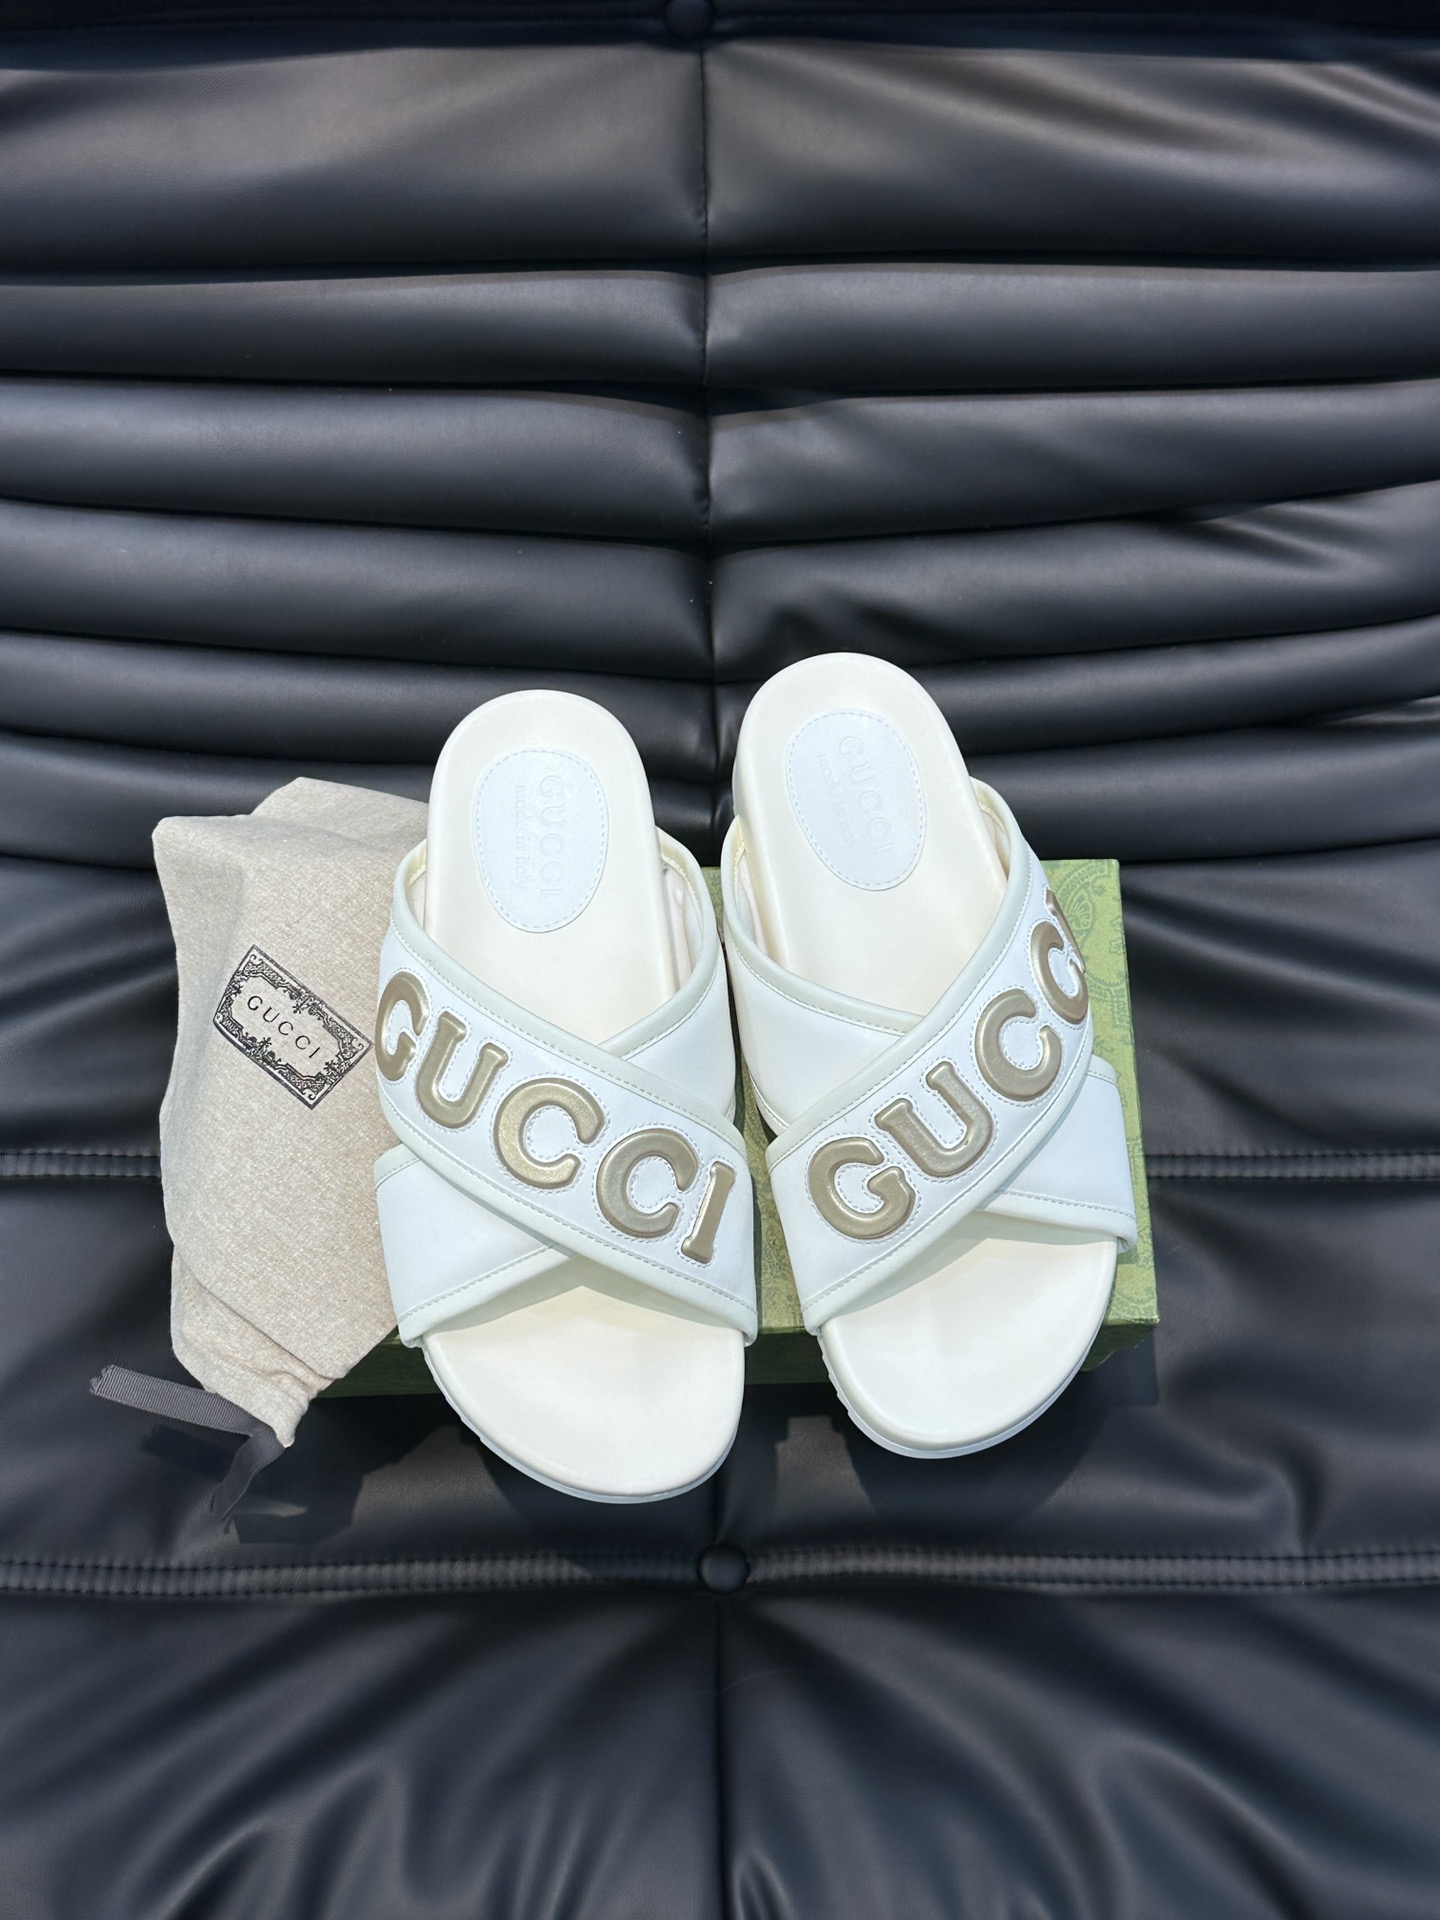 Gucci Shoes Sandals Slippers Unisex Cowhide TPU Spring/Summer Collection Fashion